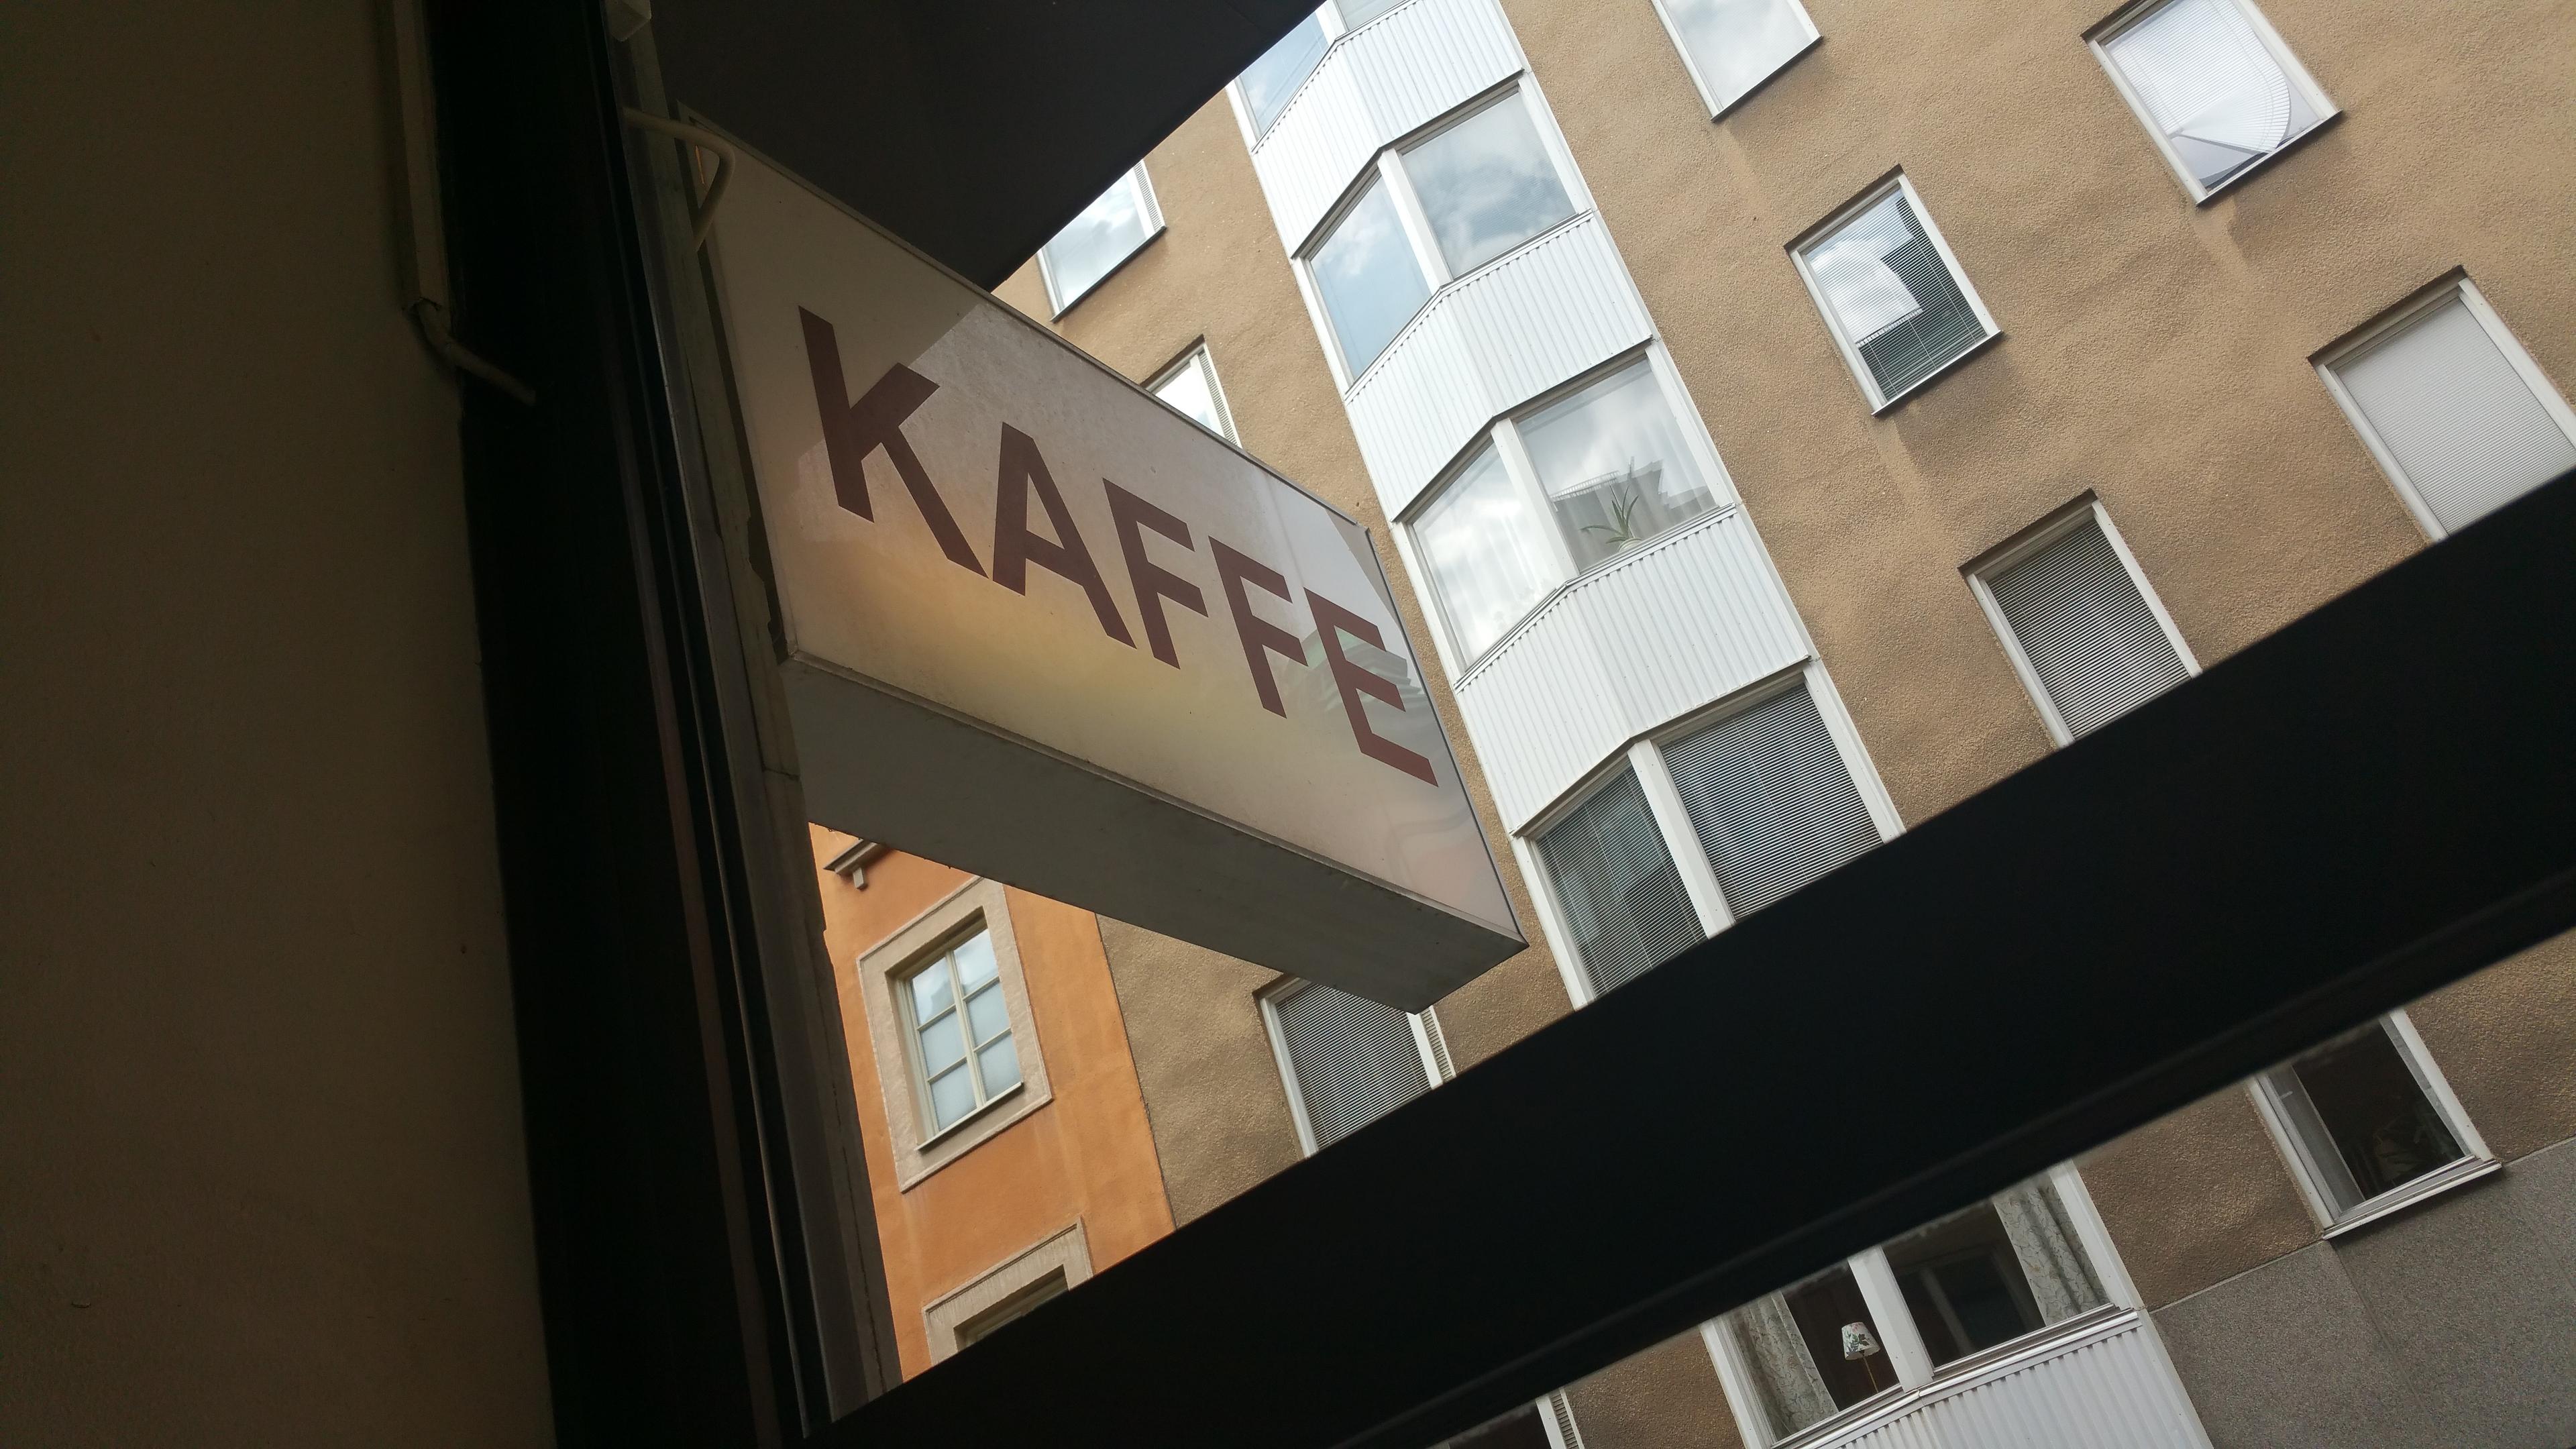 Cover image of this place Kaffe